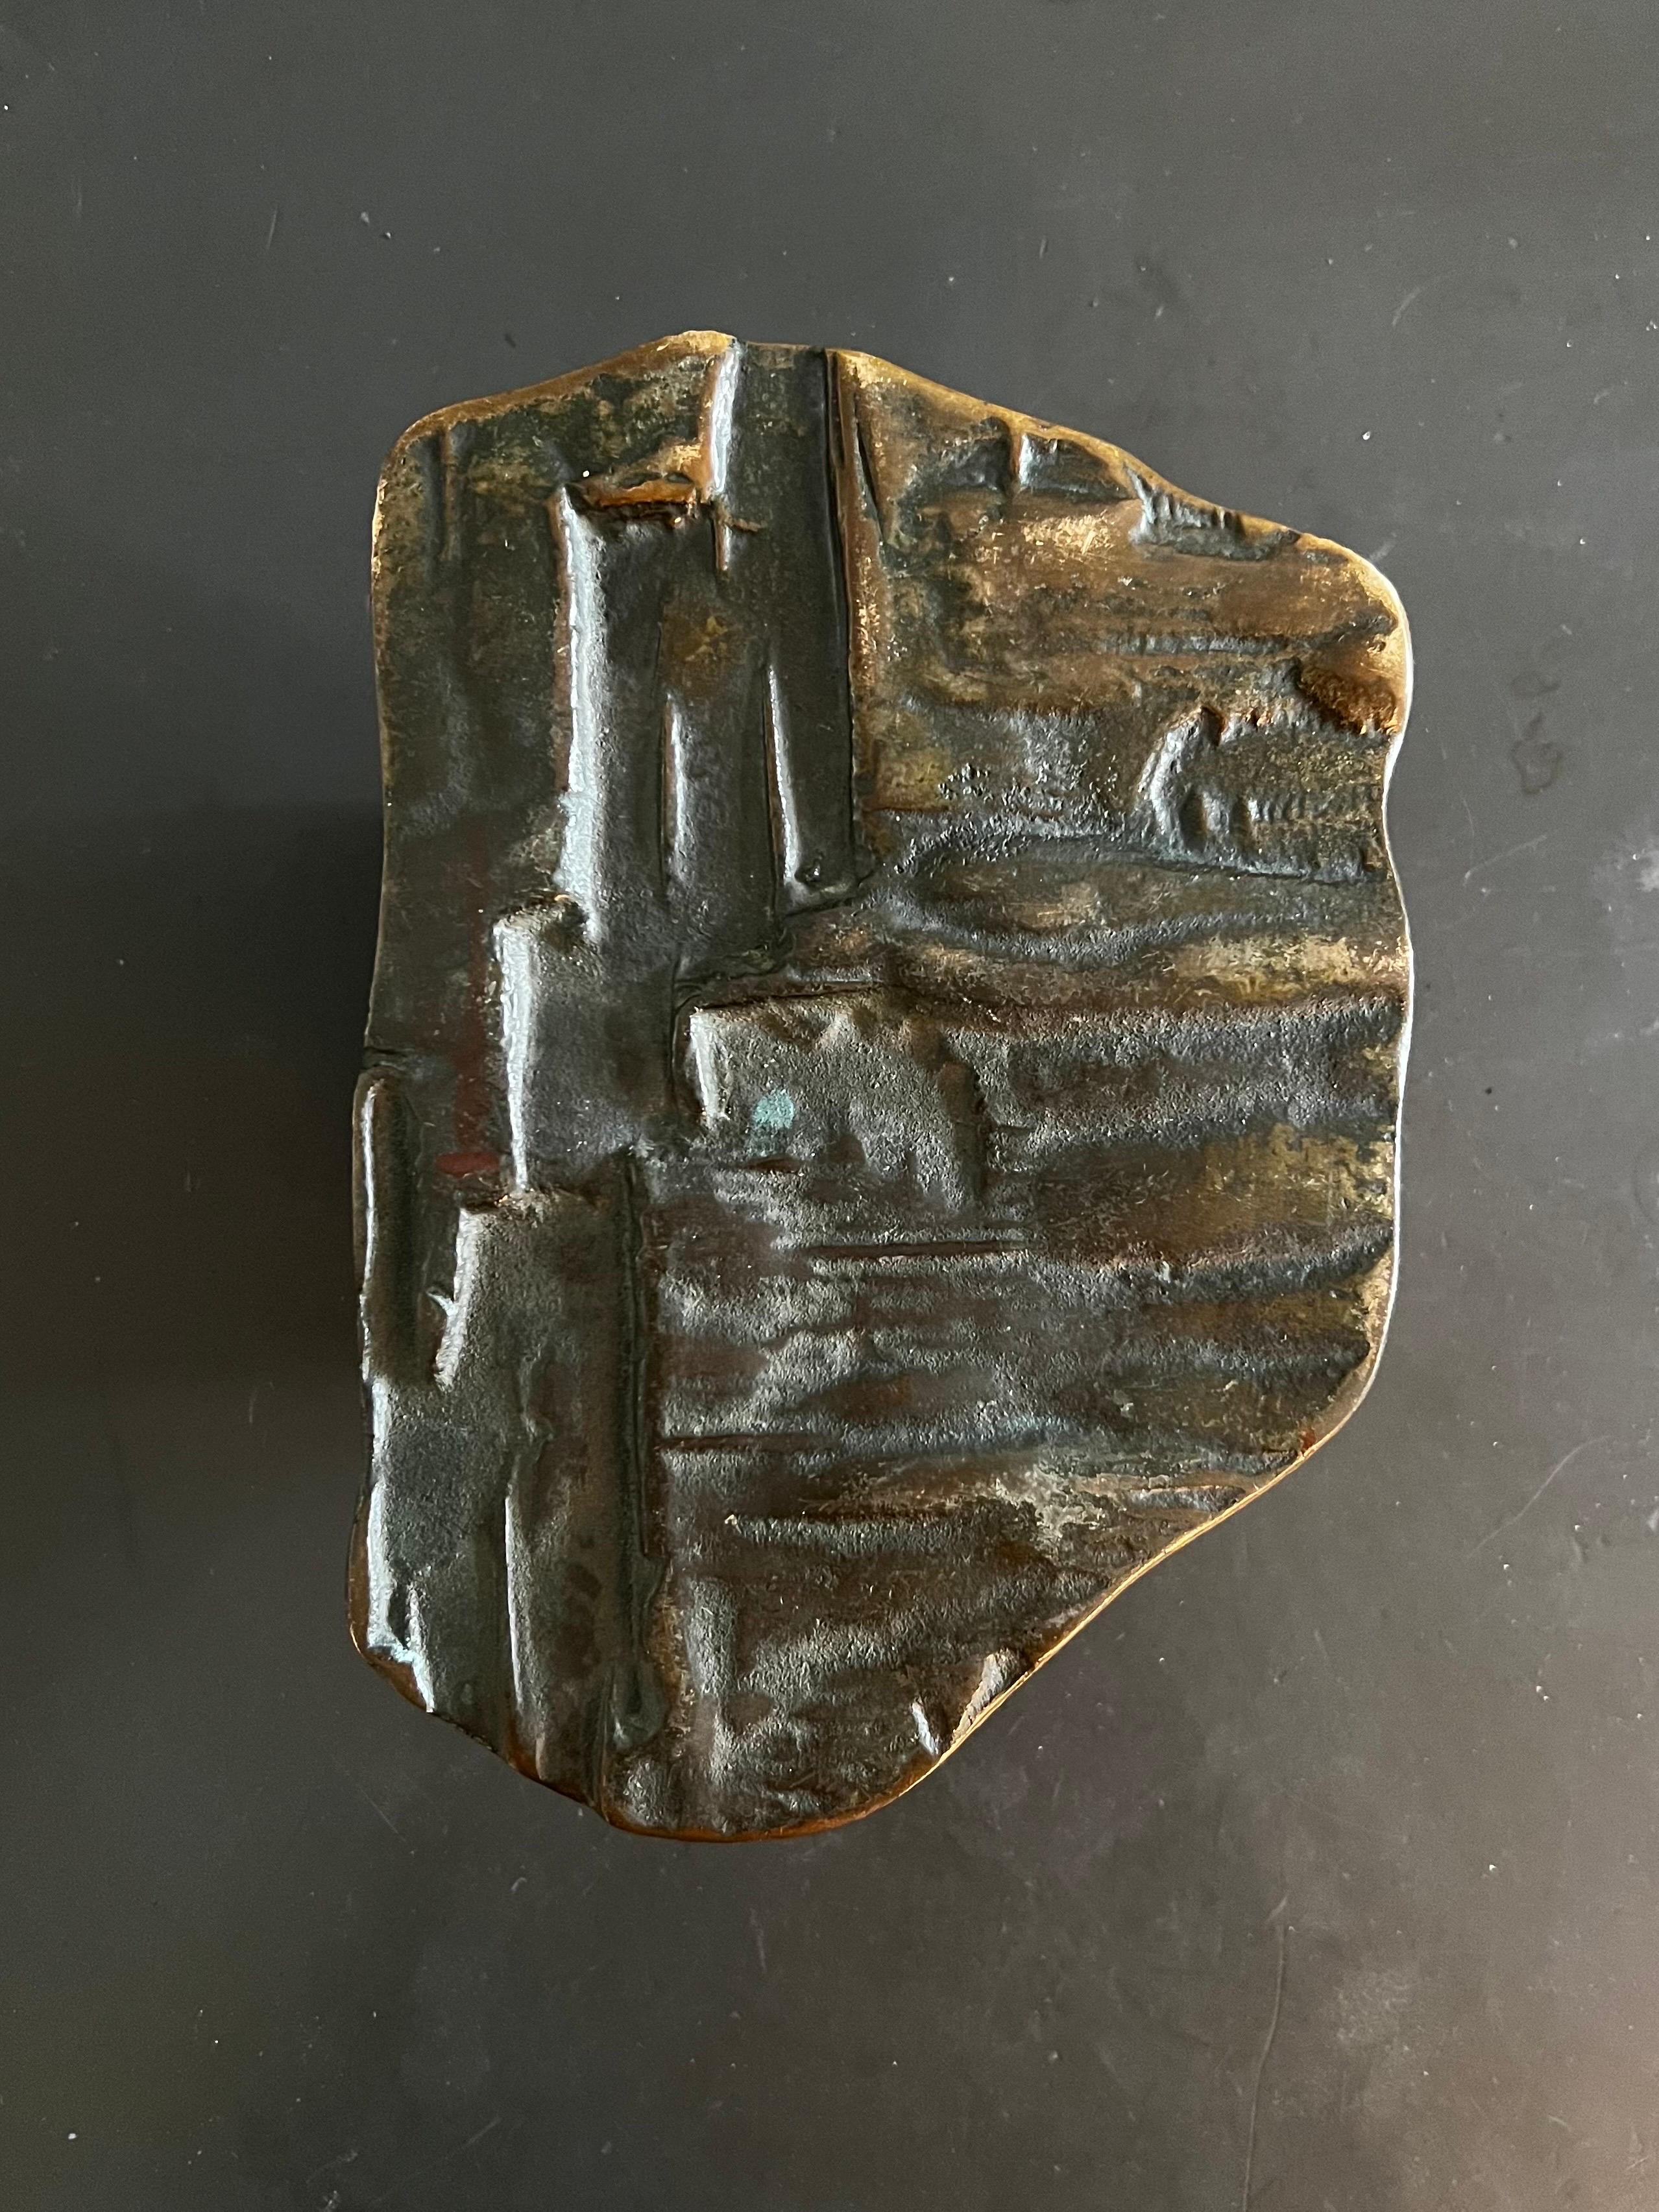 A large bronze door handle - push or pull design - with raised abstract pattern. Mid-to-late 20th century, European.

This is a heavy piece, made of cast bronze; e have not cleaned or polished this piece and it is offered as found. The metal has